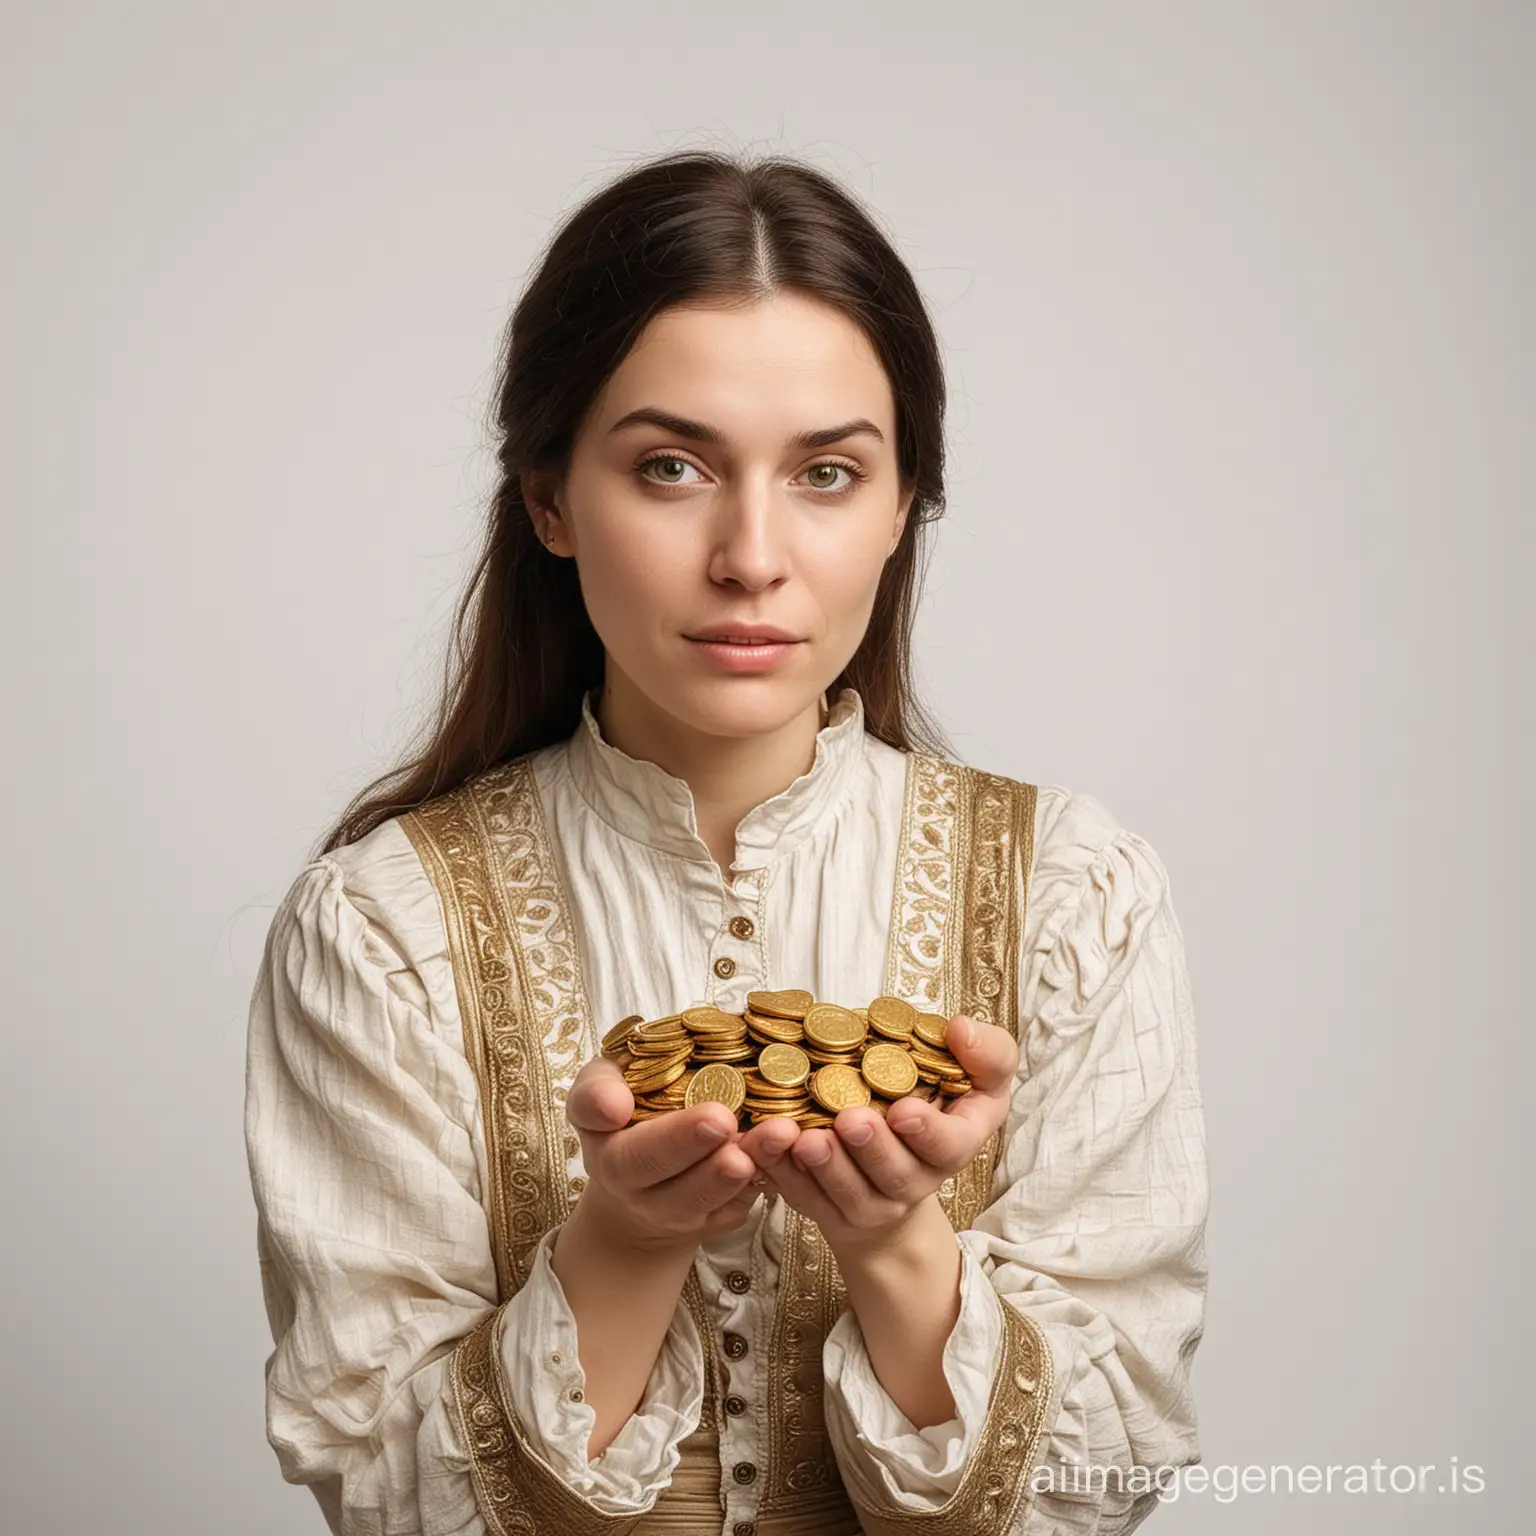 Medieval-Woman-Holding-Gold-Coins-Portrayal-of-Financial-Concerns-in-Historical-Setting